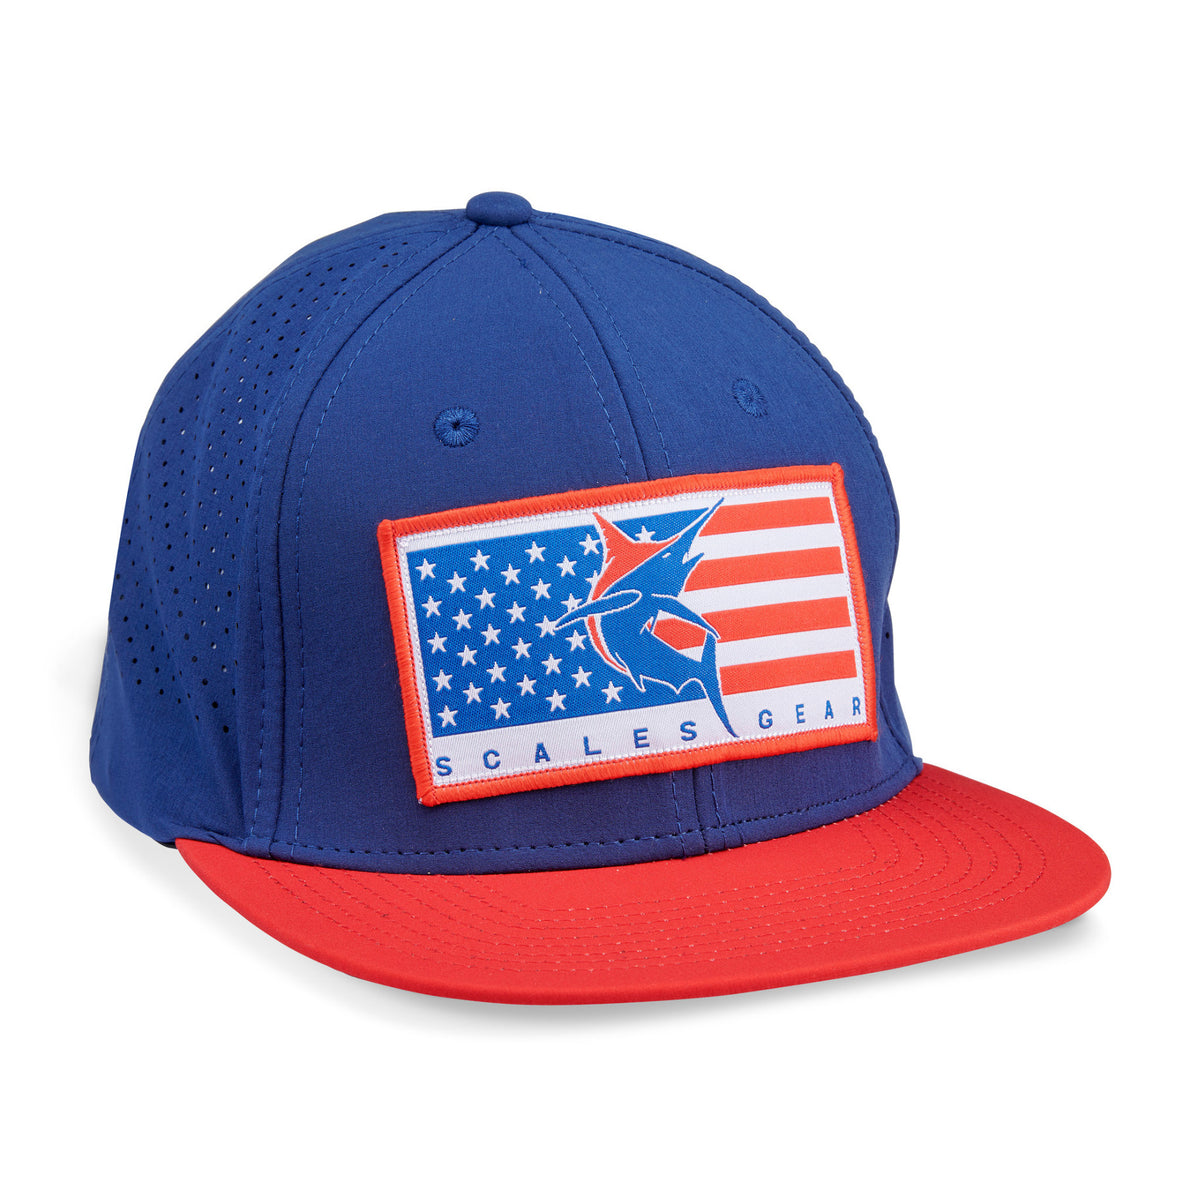 SCALES Marlin Club Hat - Navy/Red